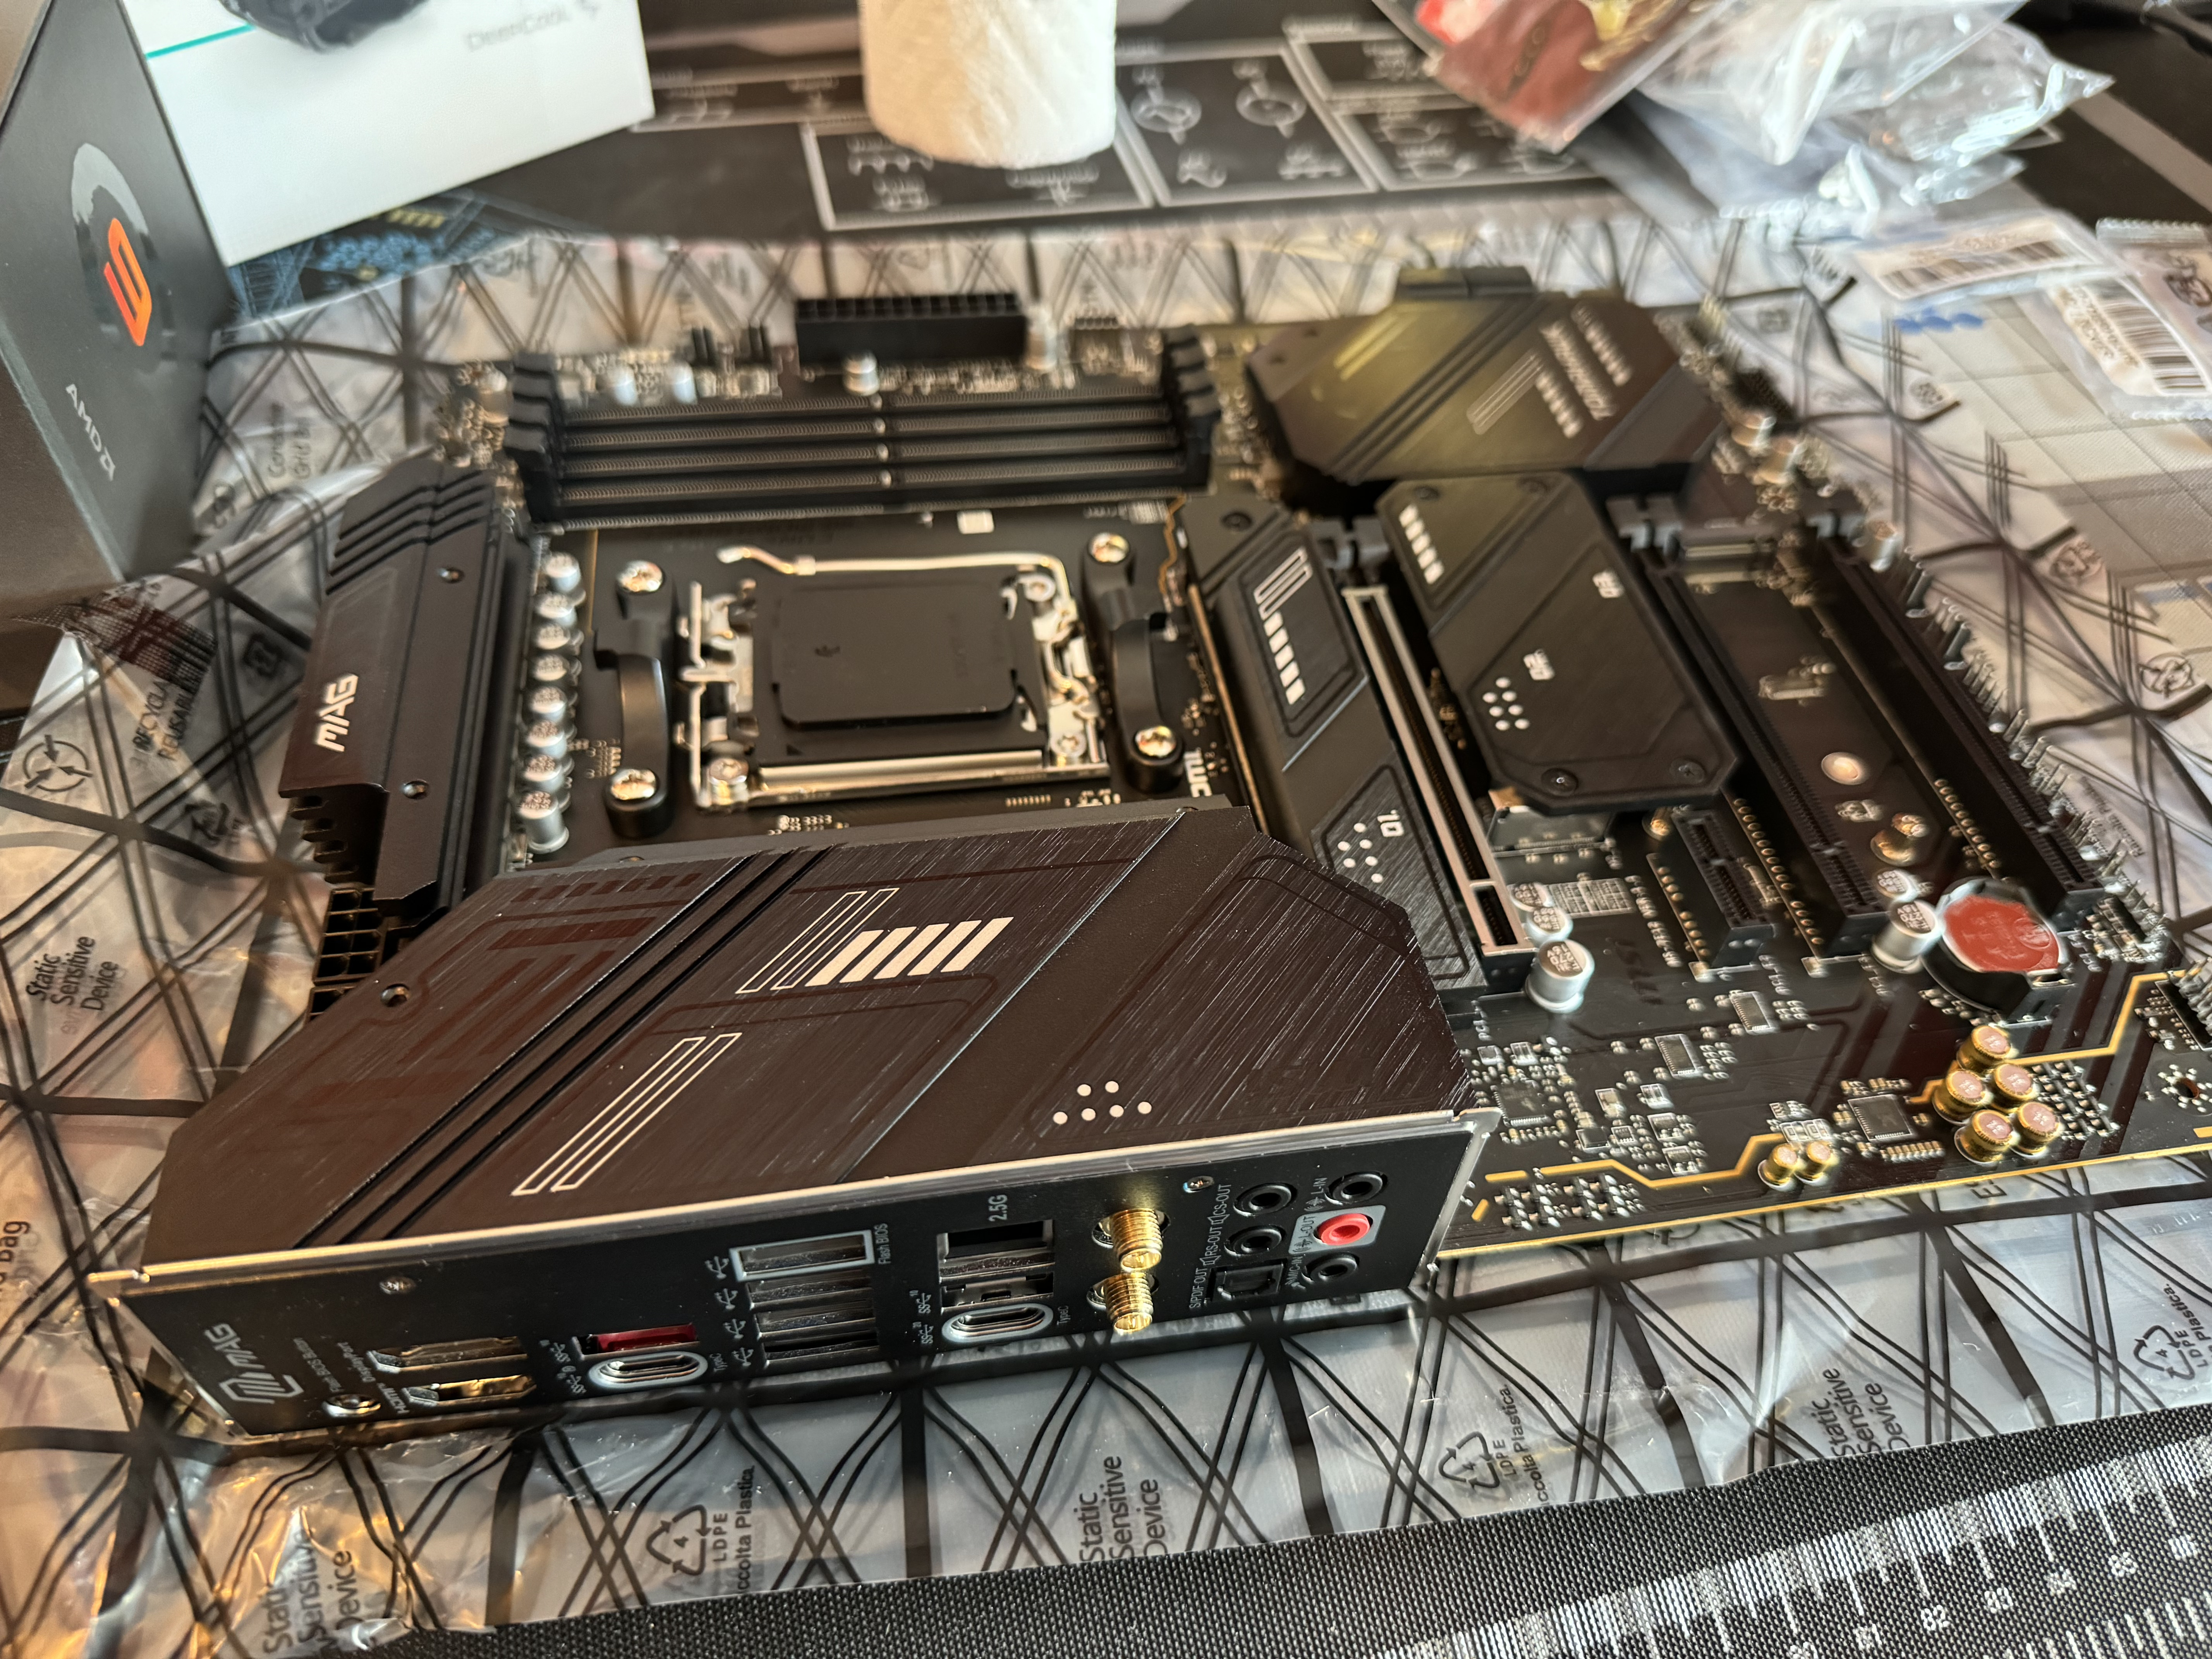 The motherboard, in all its glory.